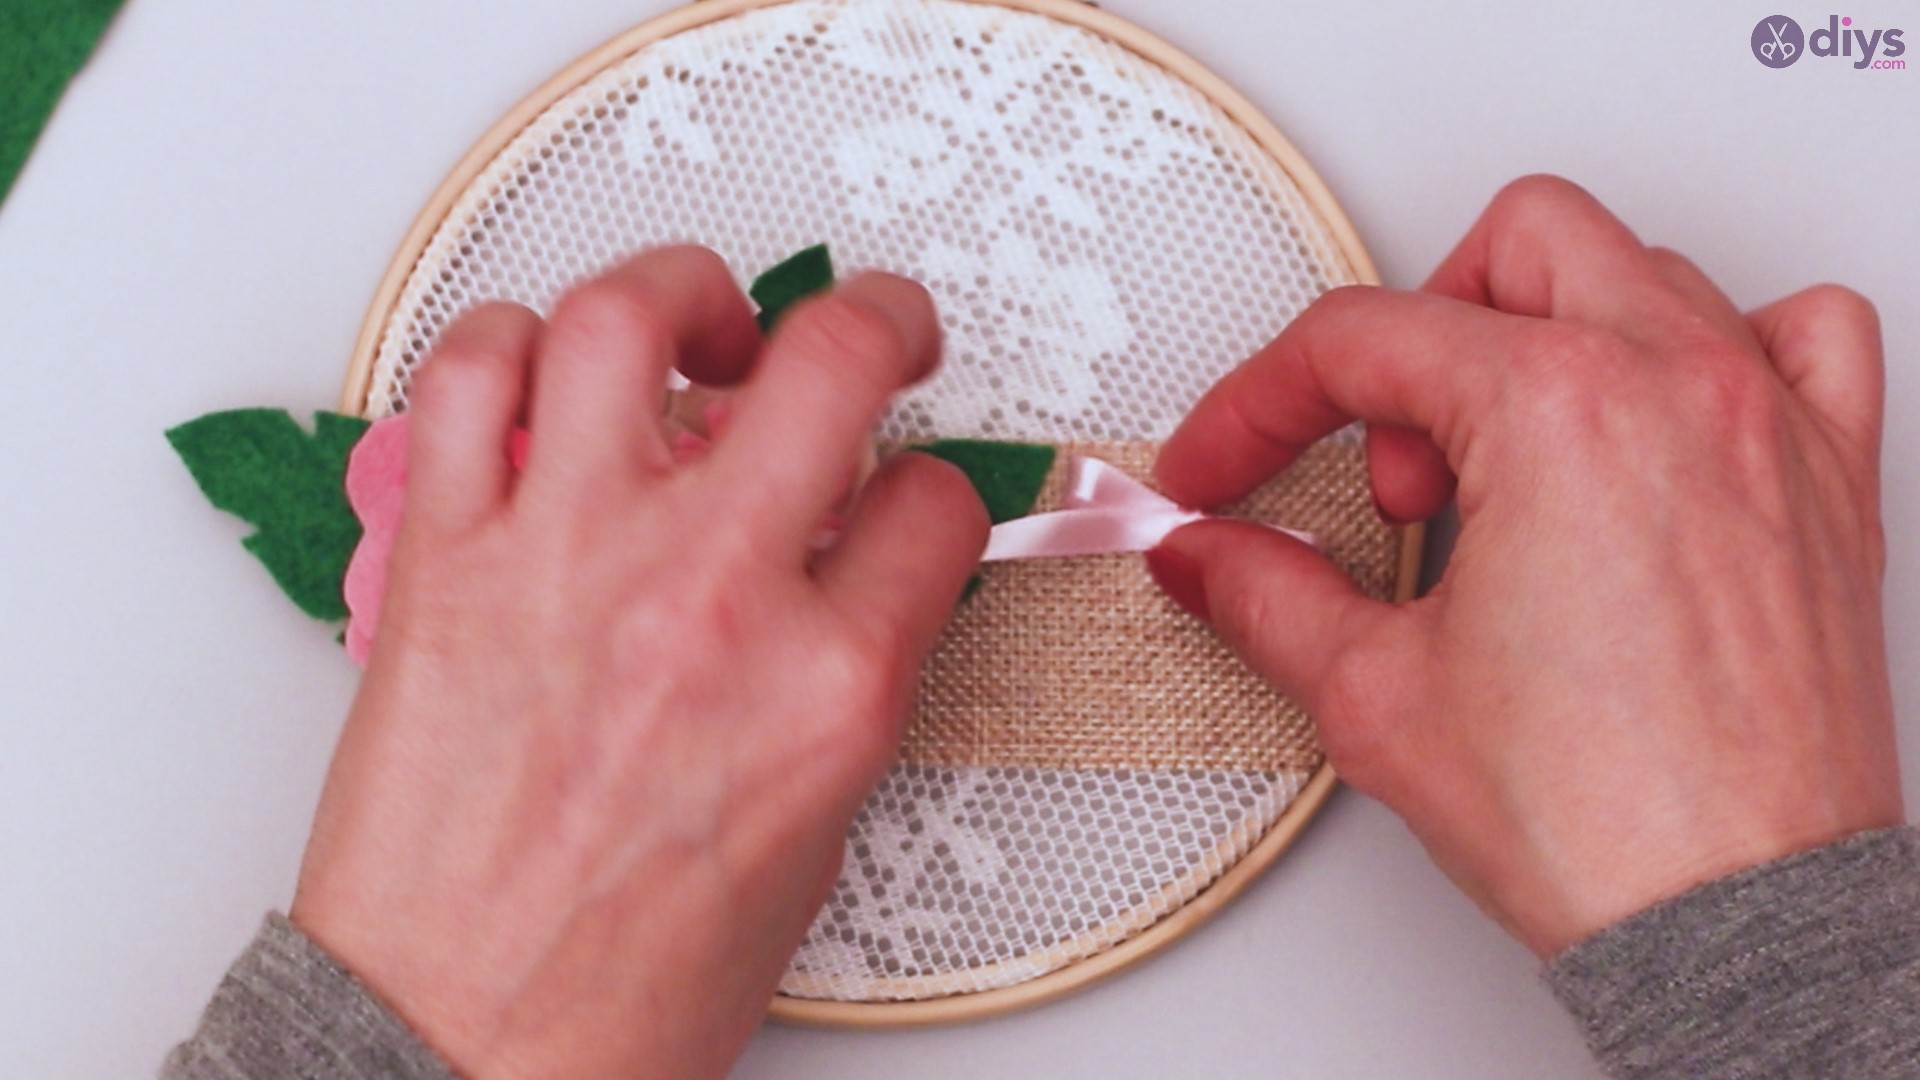 Diy embroidery hoop wall decor tutorial step by step (70)